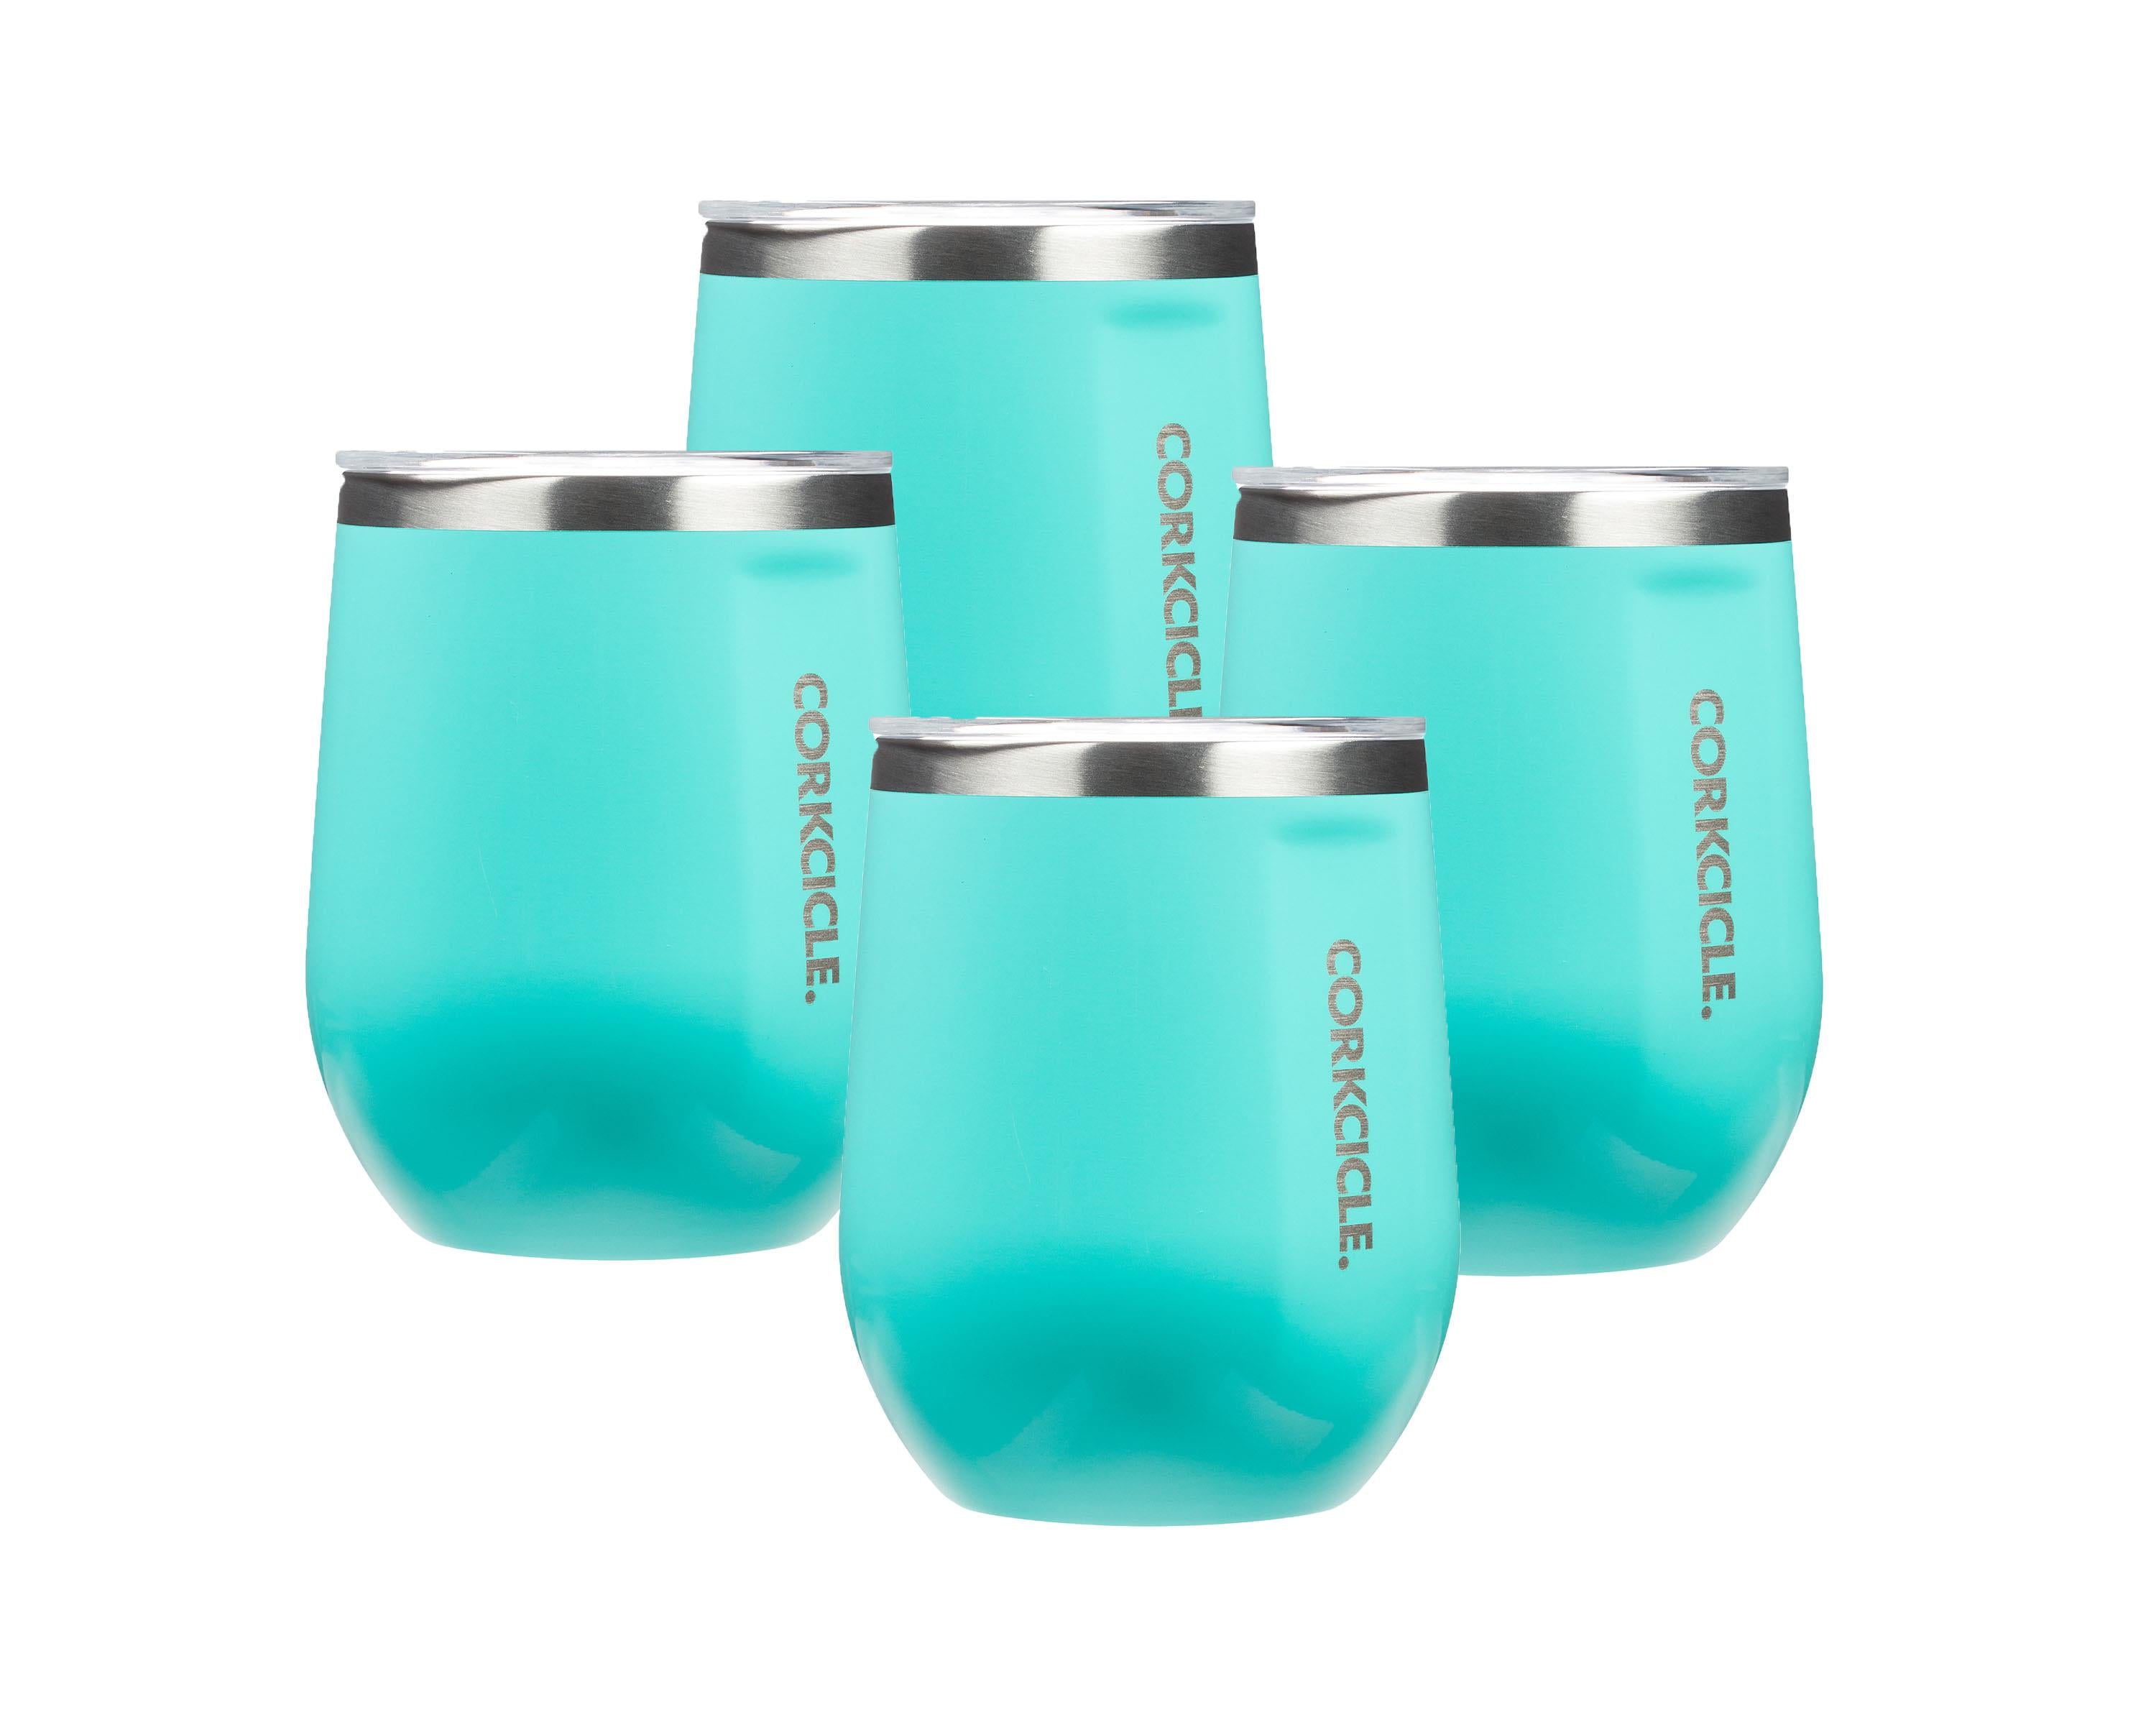 Corkcicle® 60 oz Canteen and Stemless Wine Glass Set - Turquoise